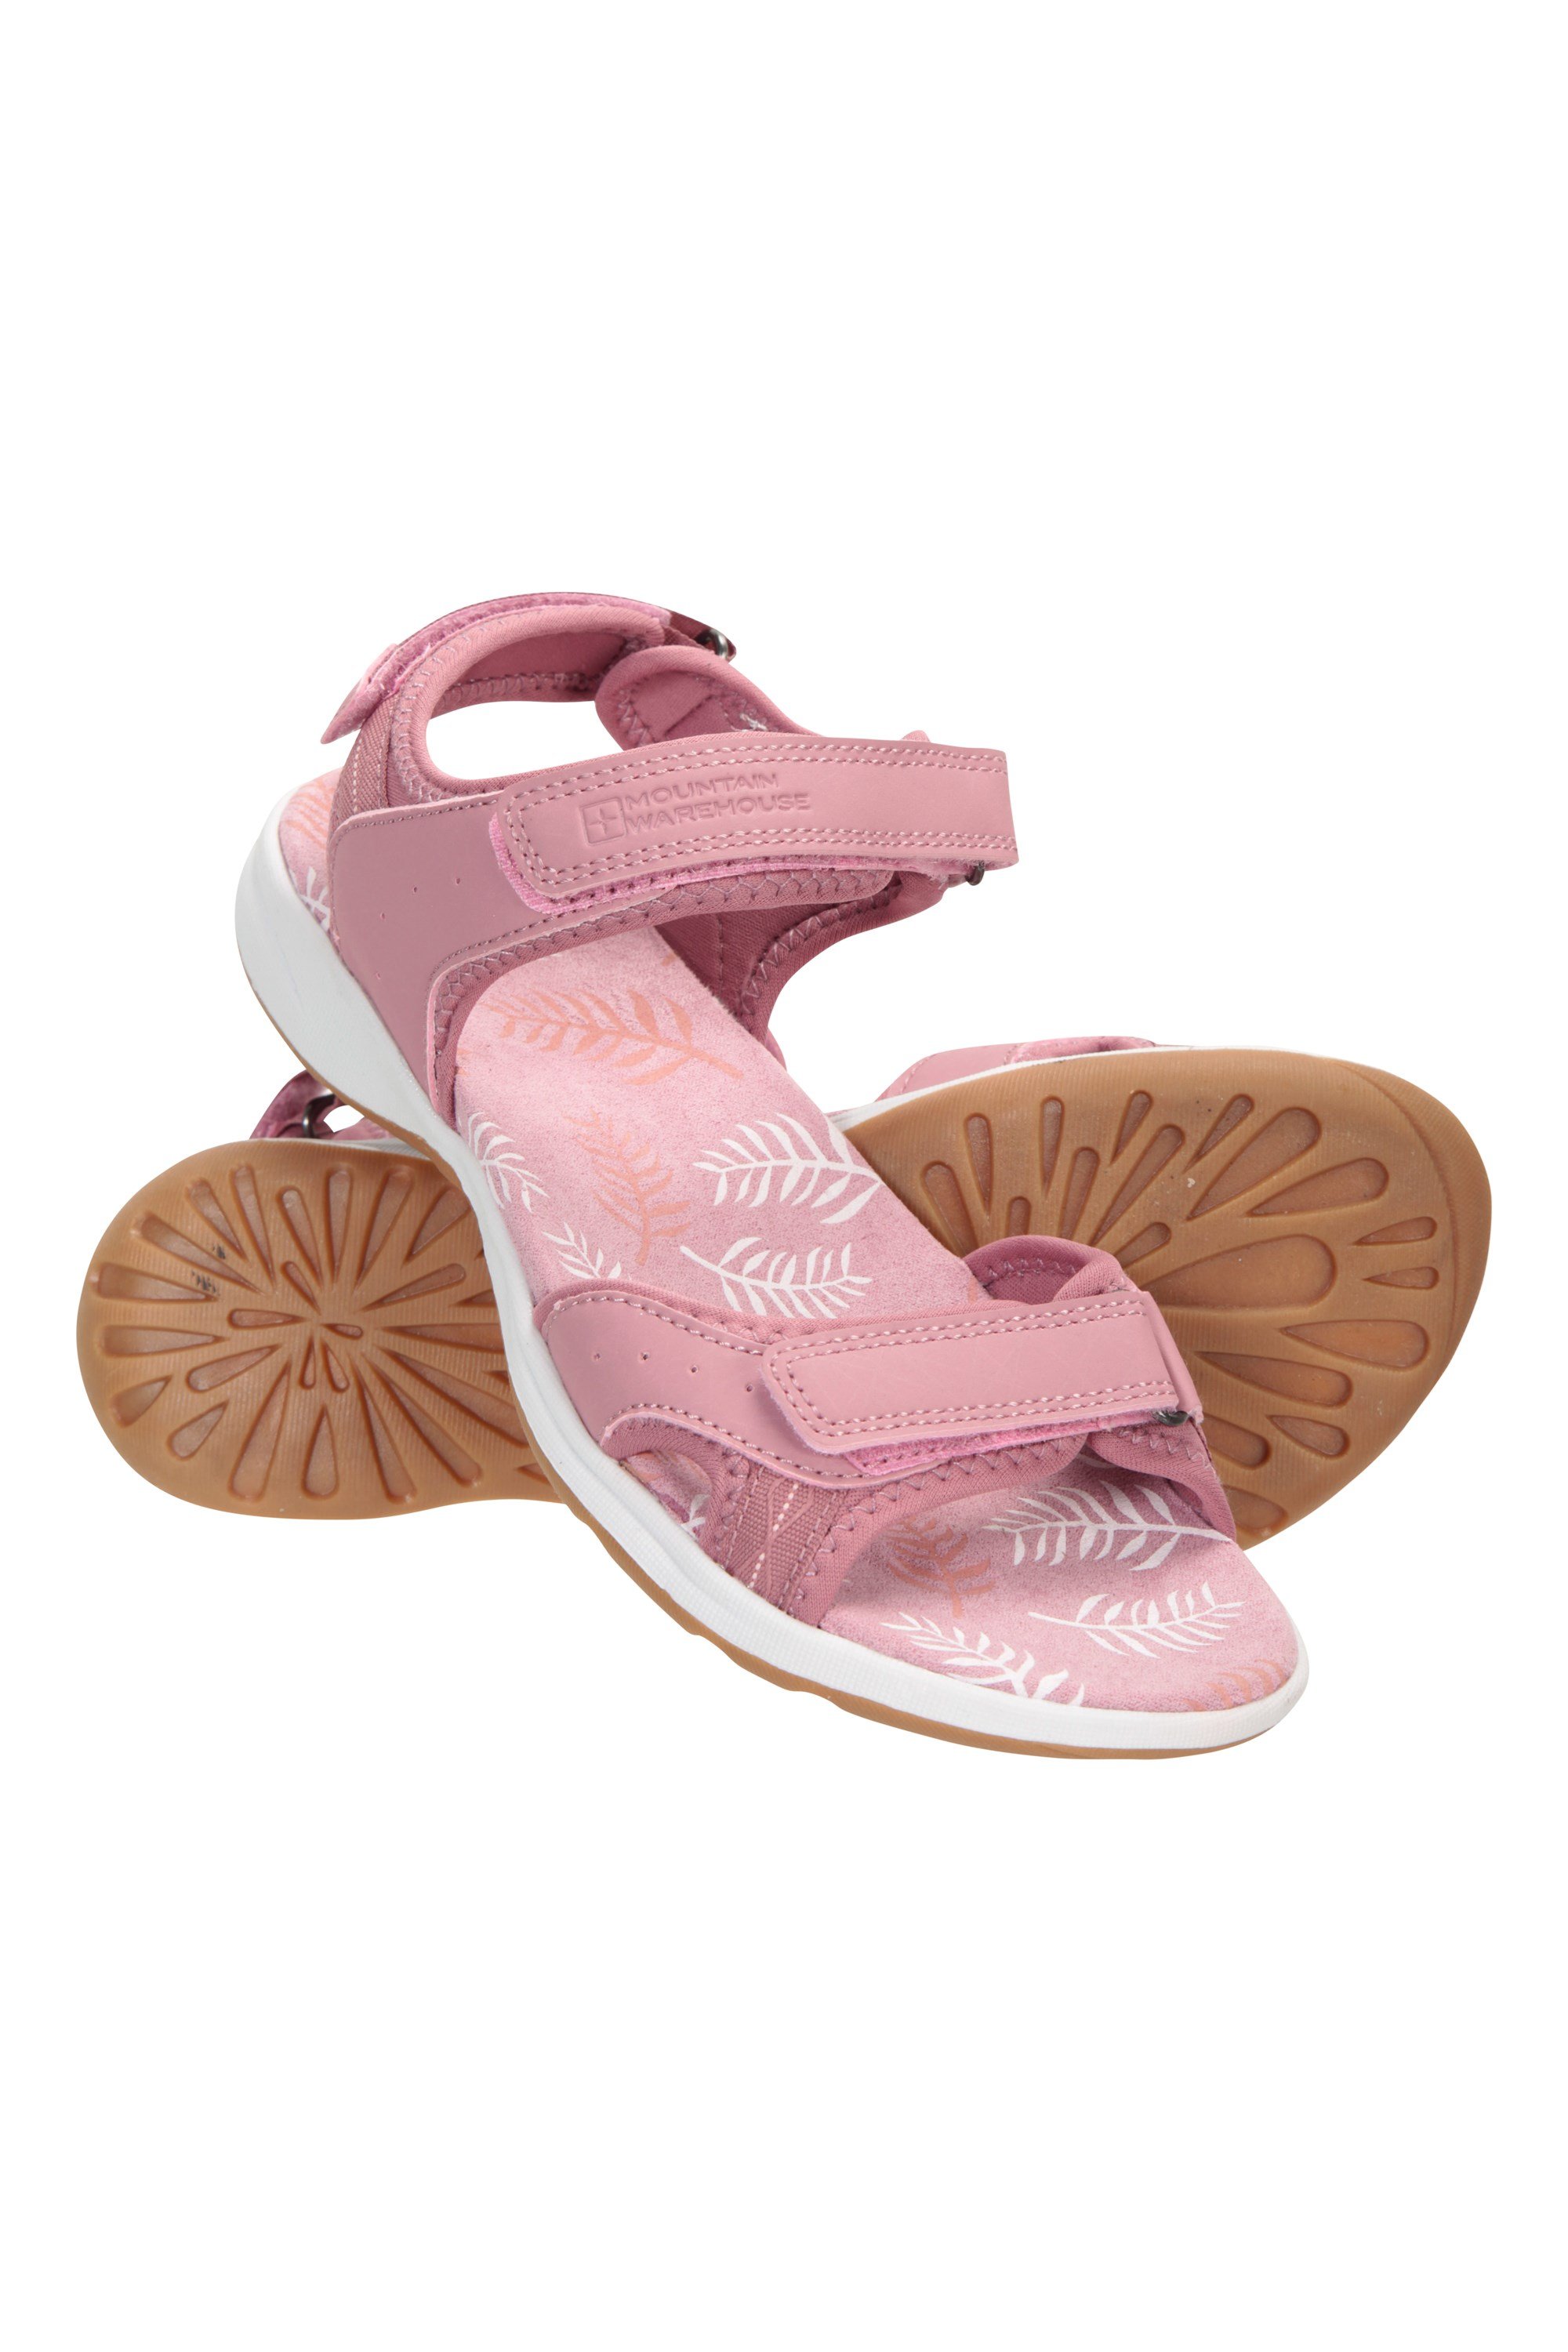 Athens Printed Womens Sandals - Pink